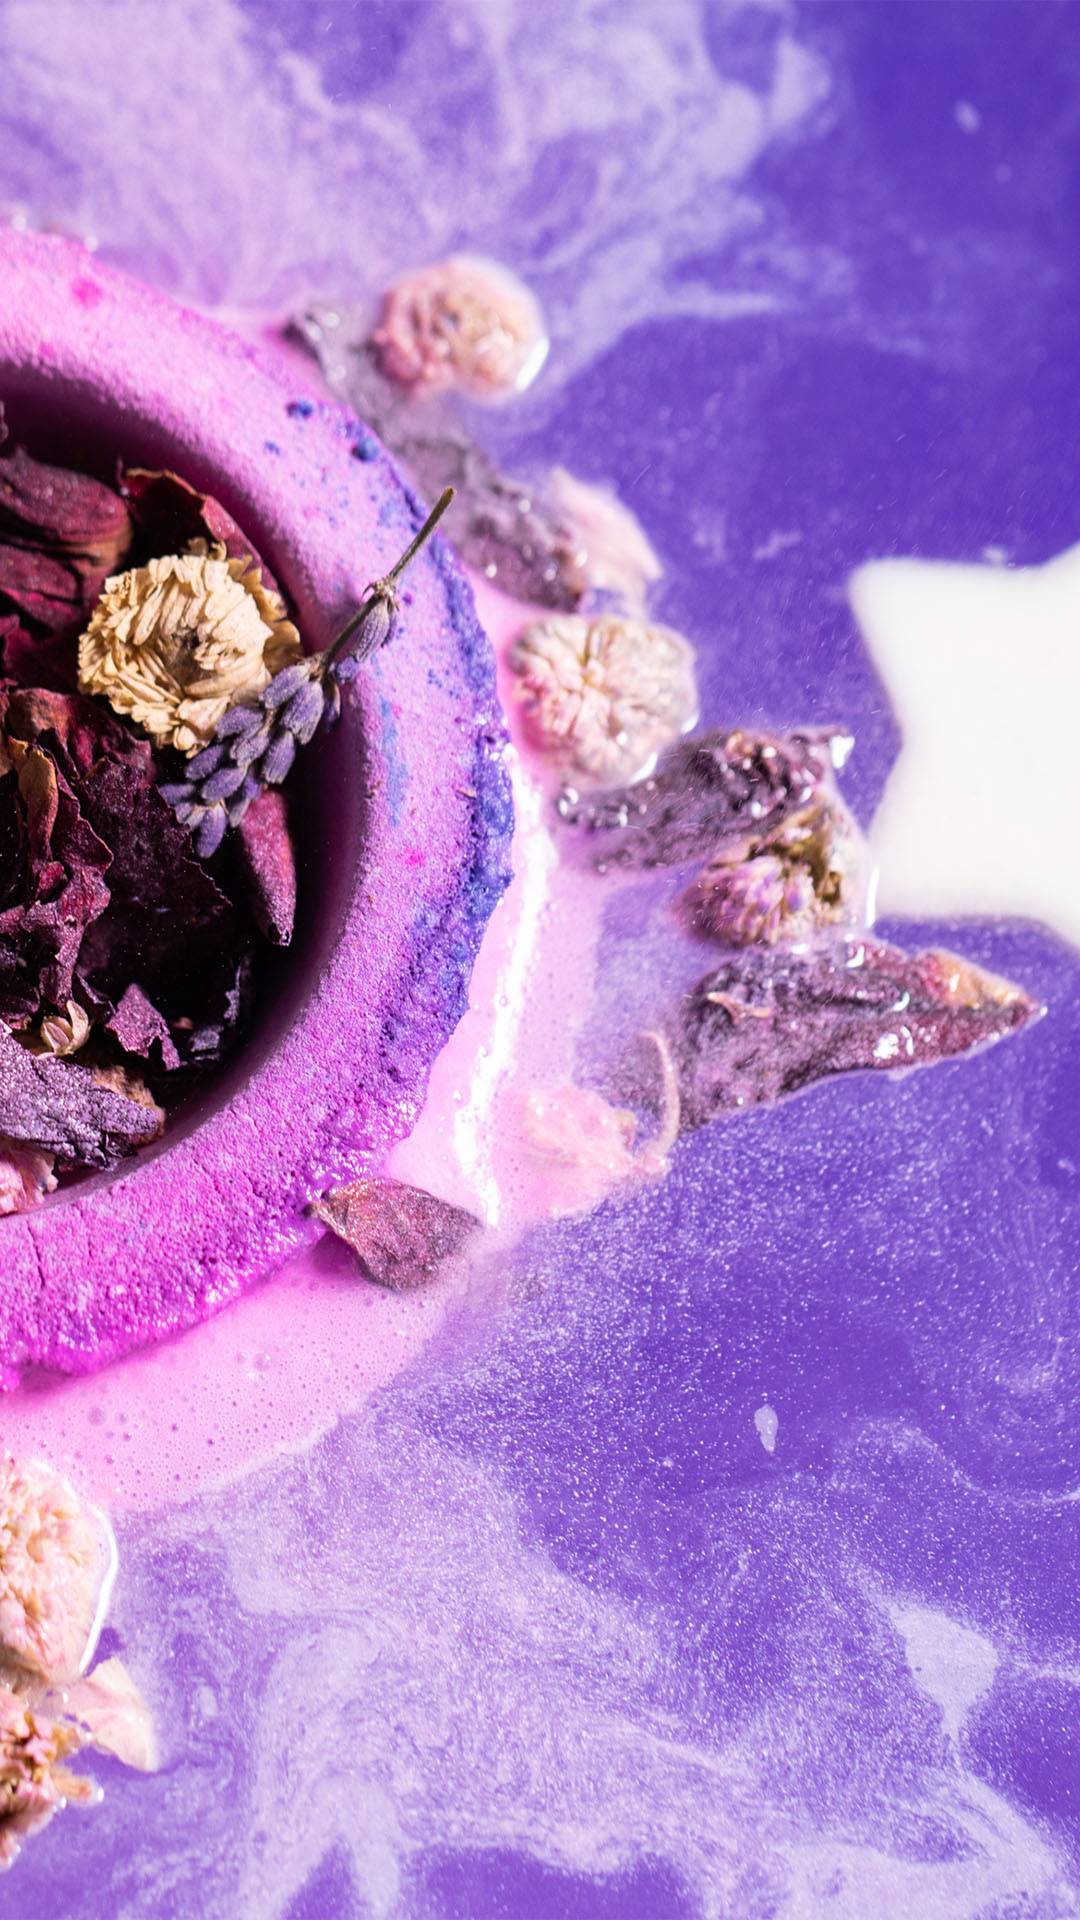 A pink bombshell exploding with petals in purple fizzy water.